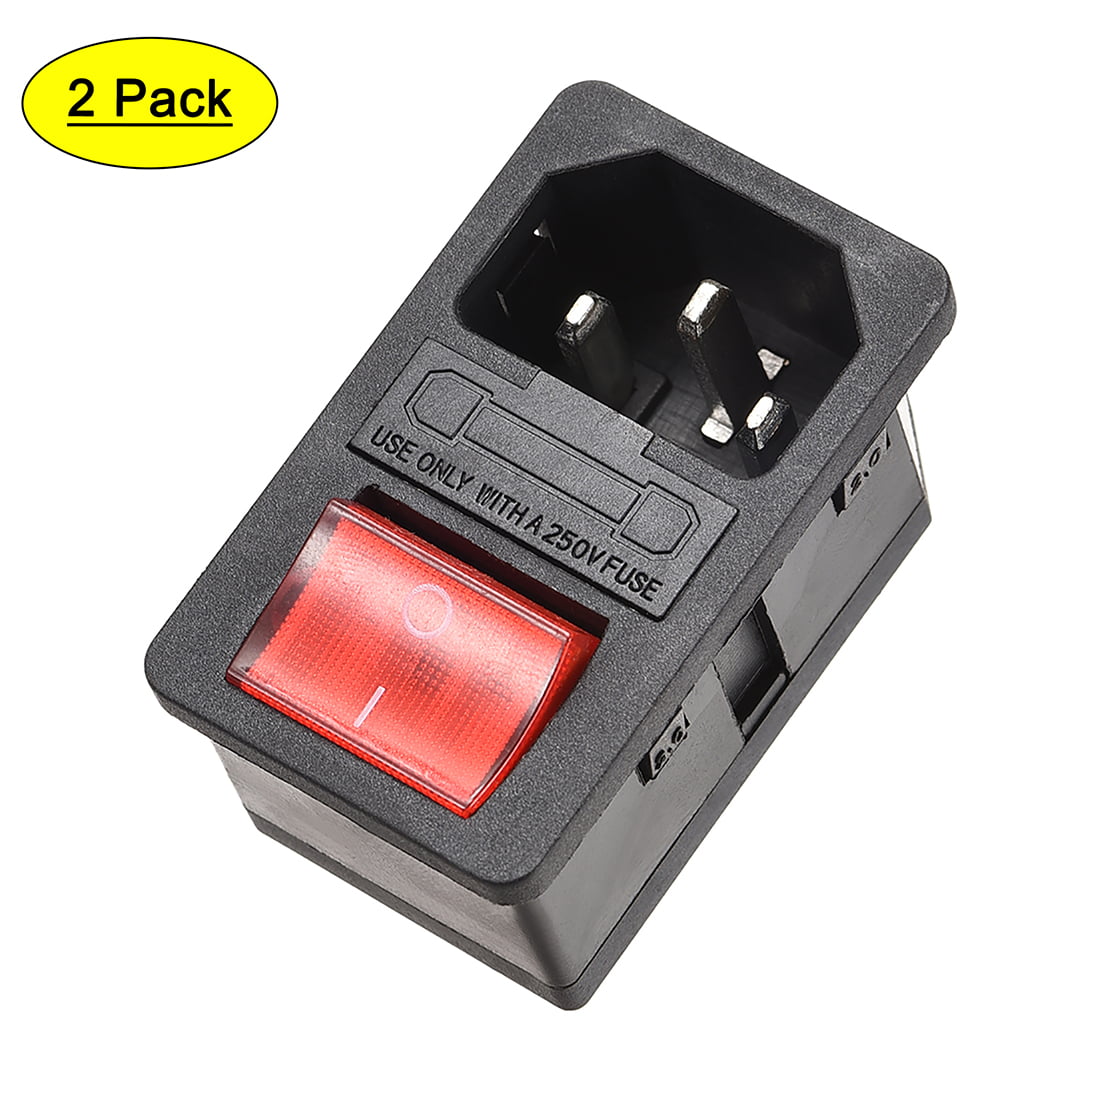 IEC320 AC Power cord Inlet Mains Power Receptacle With ON OFF Red Rocker Switch 